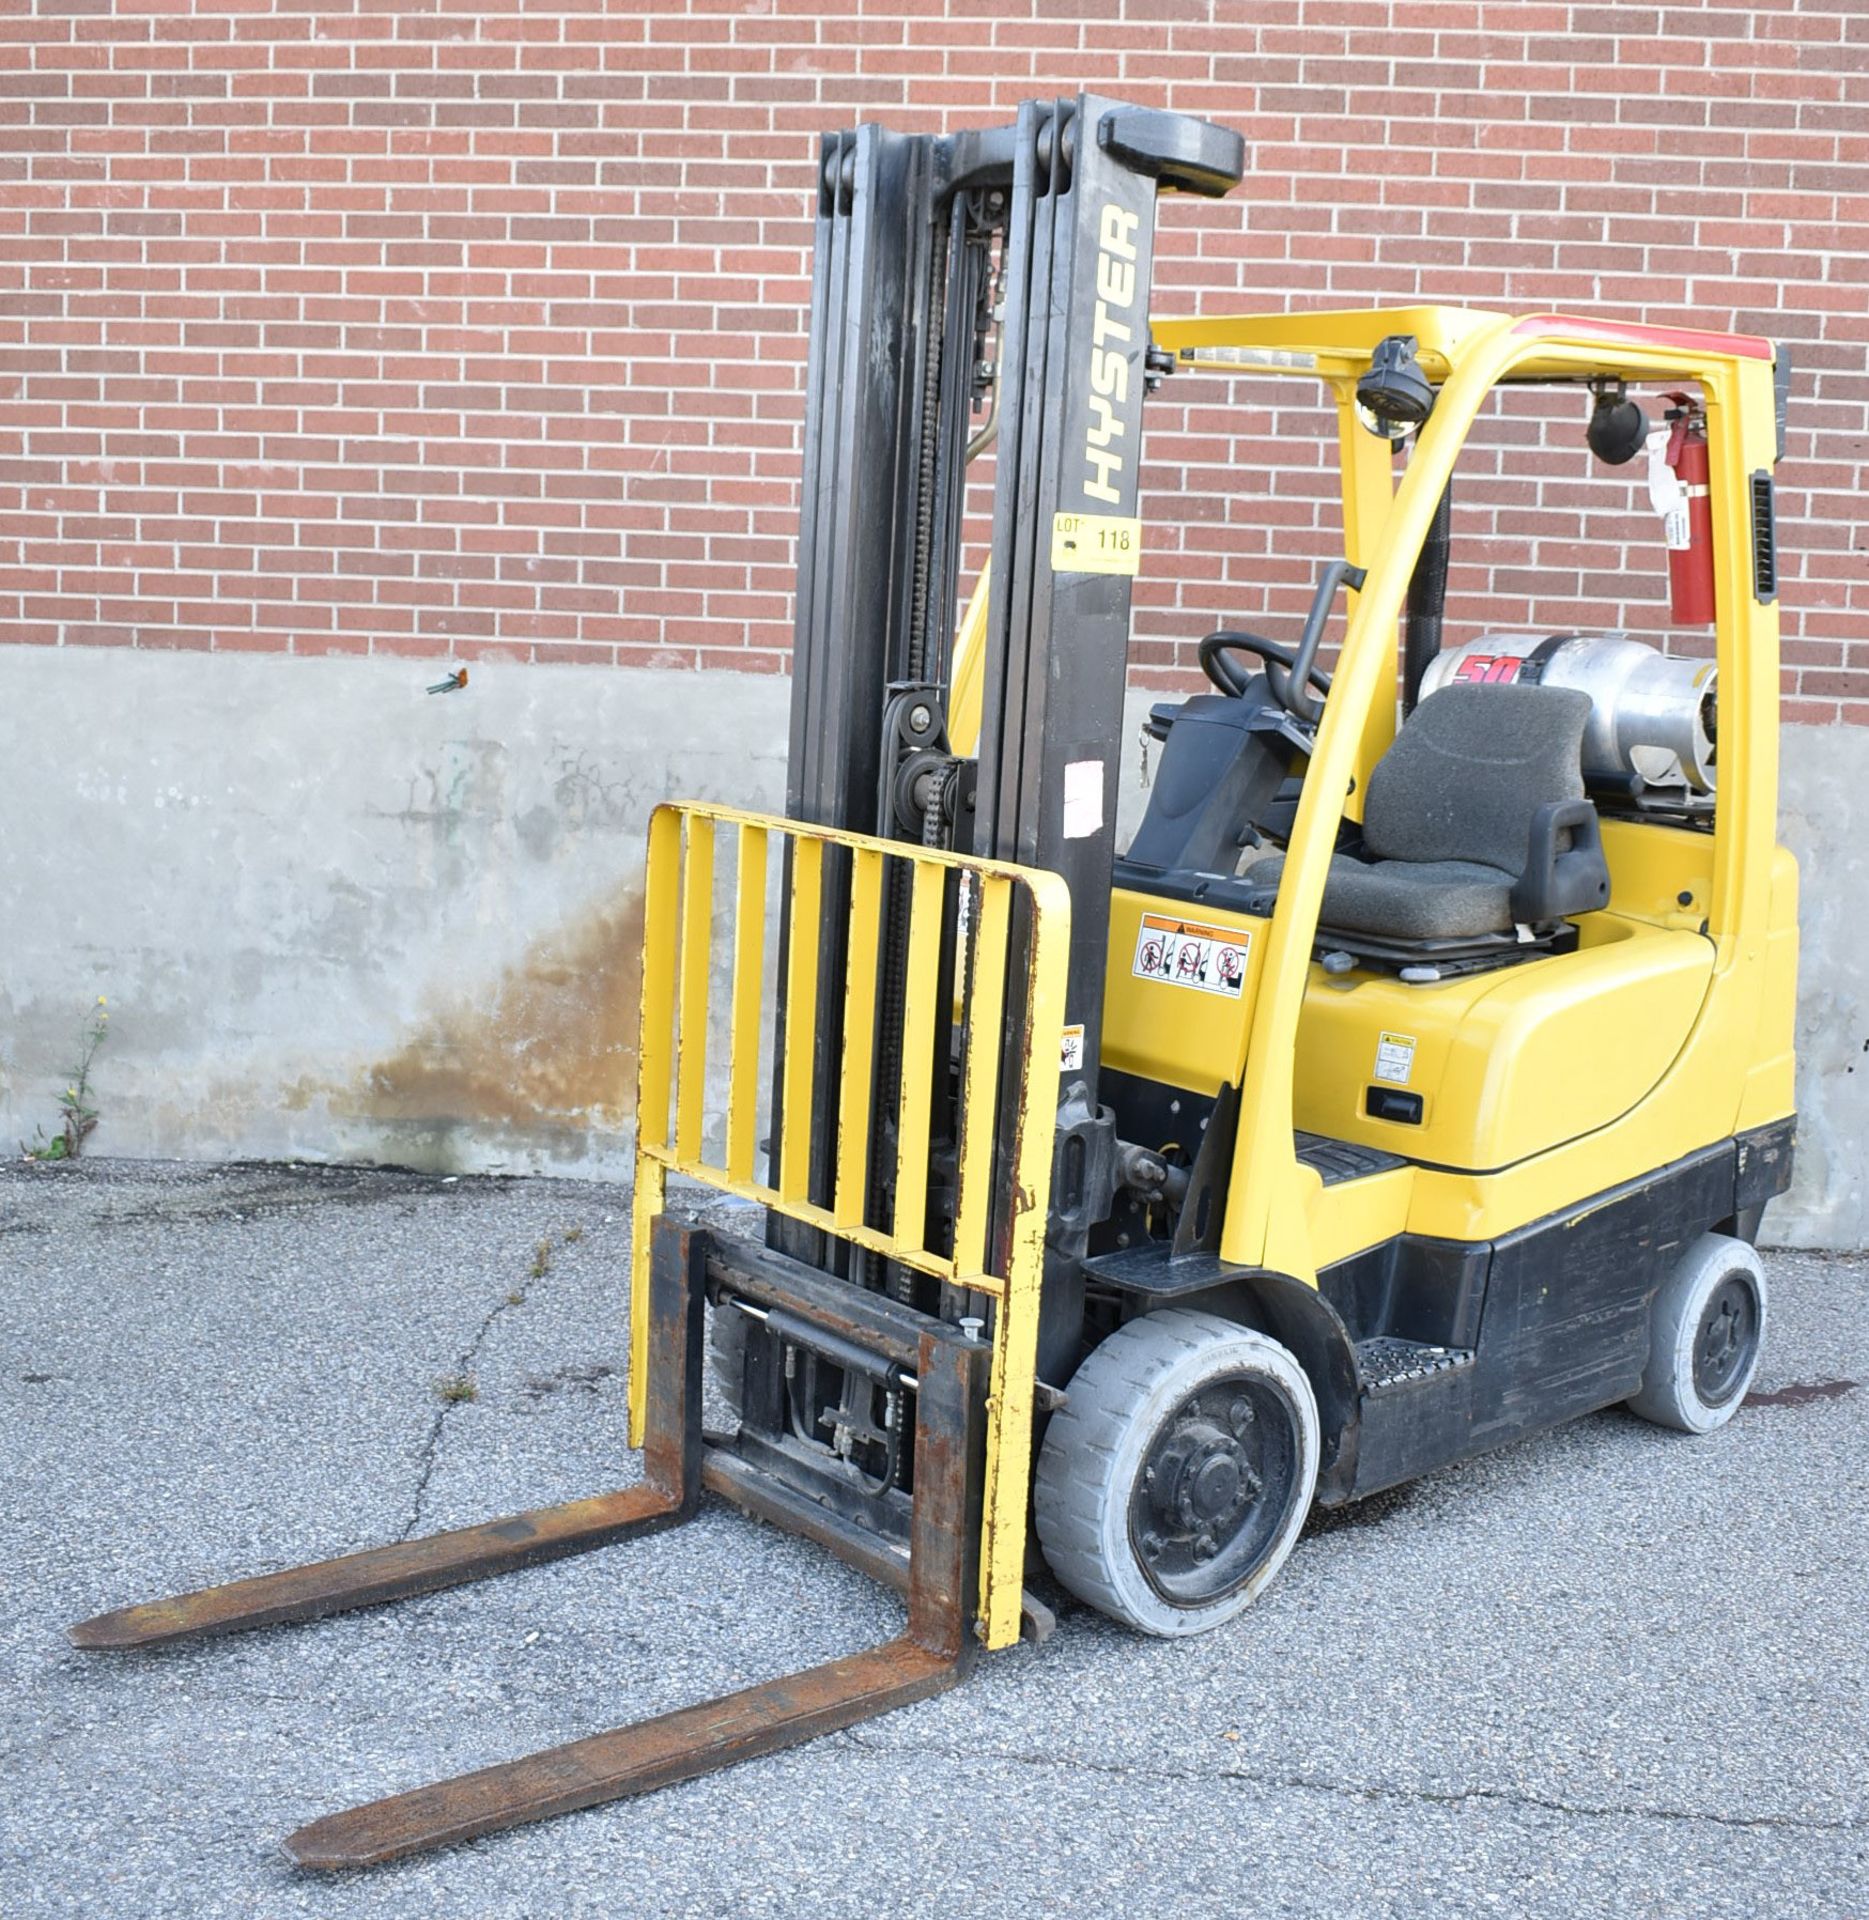 HYSTER S50FT 4,200 LB CAPACITY LPG FORKLIFT WITH 218.5" MAXIMUM LIFT HEIGHT, 3-STAGE MAST, SIDE